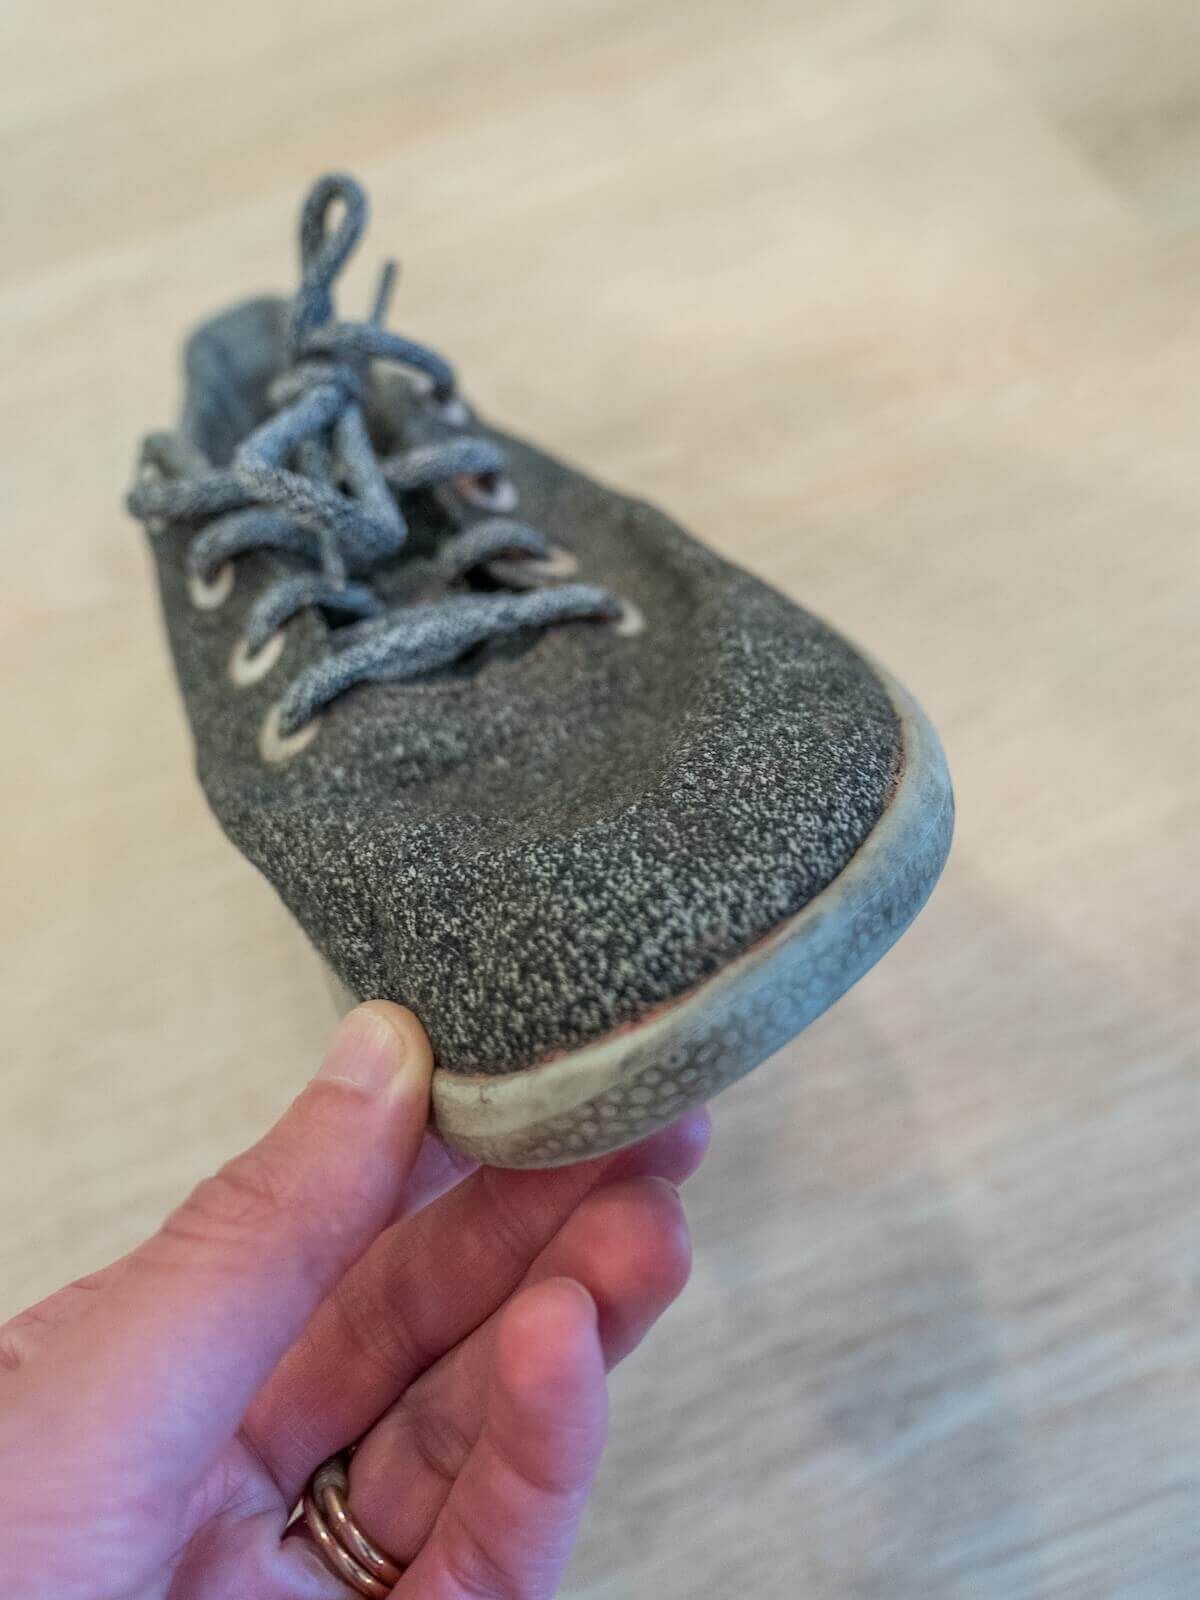 A hand holds the toe of a somewhat worn grey sneaker with a light hardwood floor behind it.